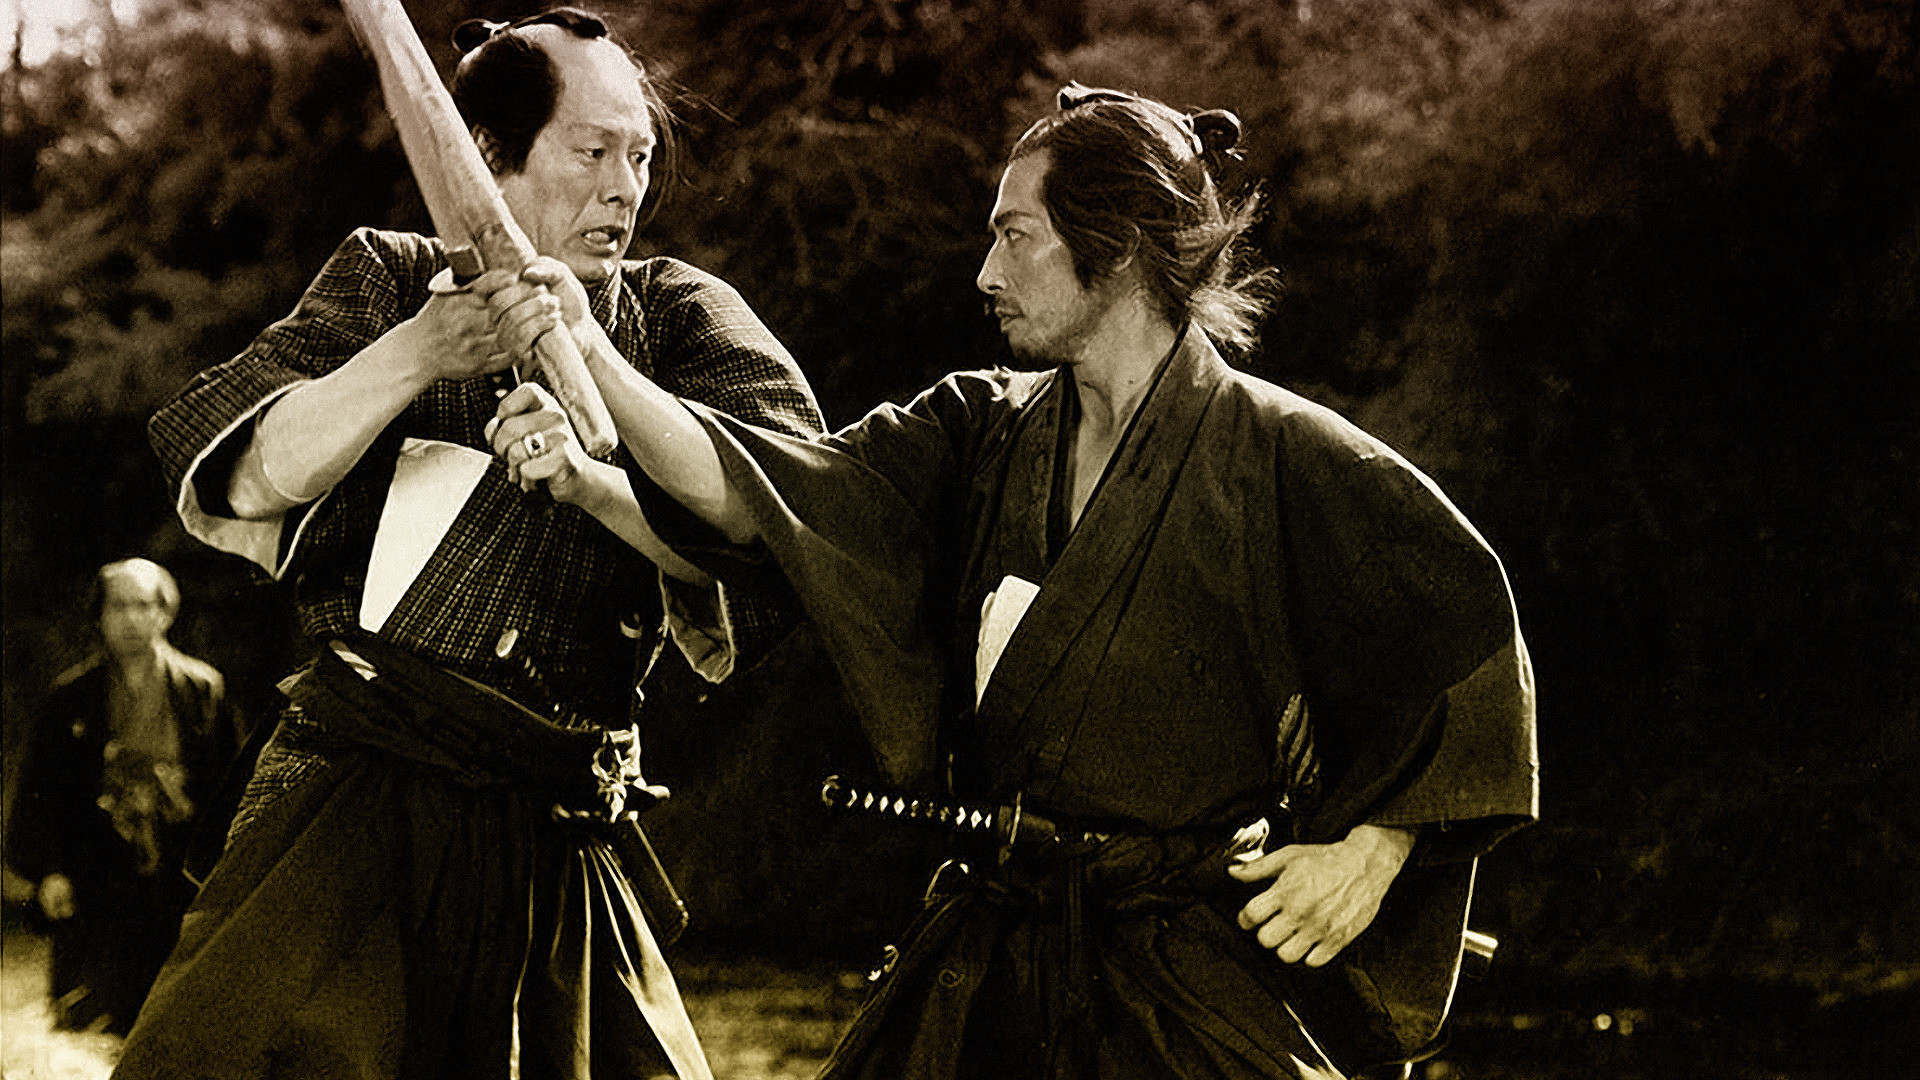 3-samurai-movies-to-stream-right-now-best-movies-by-farr